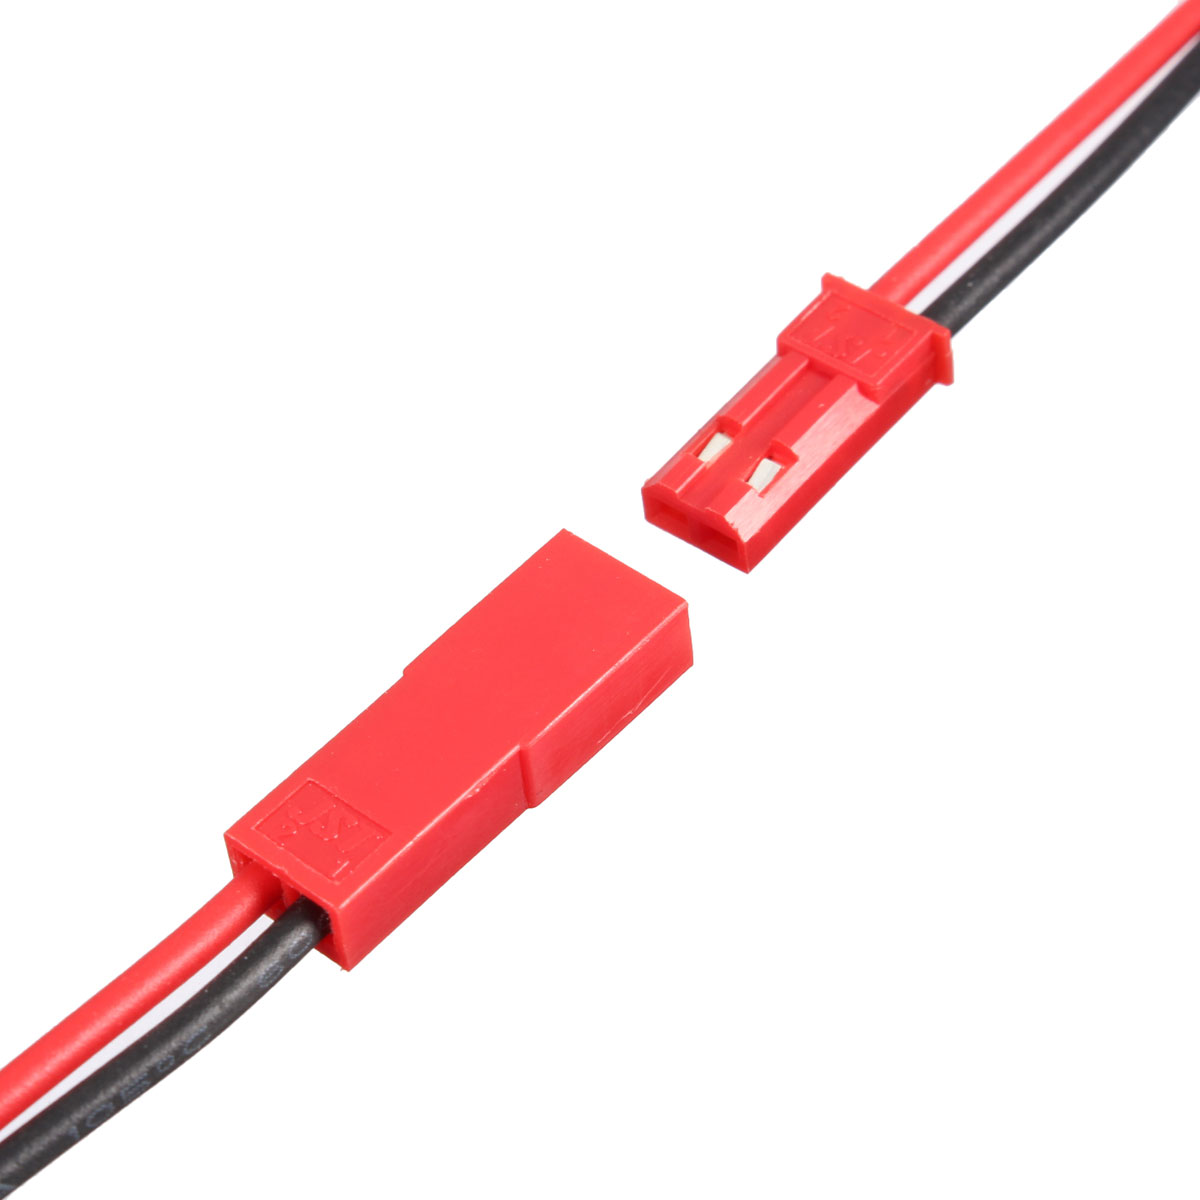 Excellwayreg-10-Pairs-2-Pins-JST-Male--Female-Connectors-Plug-Cable-Wire-Line-110mm-Red-1268119-7